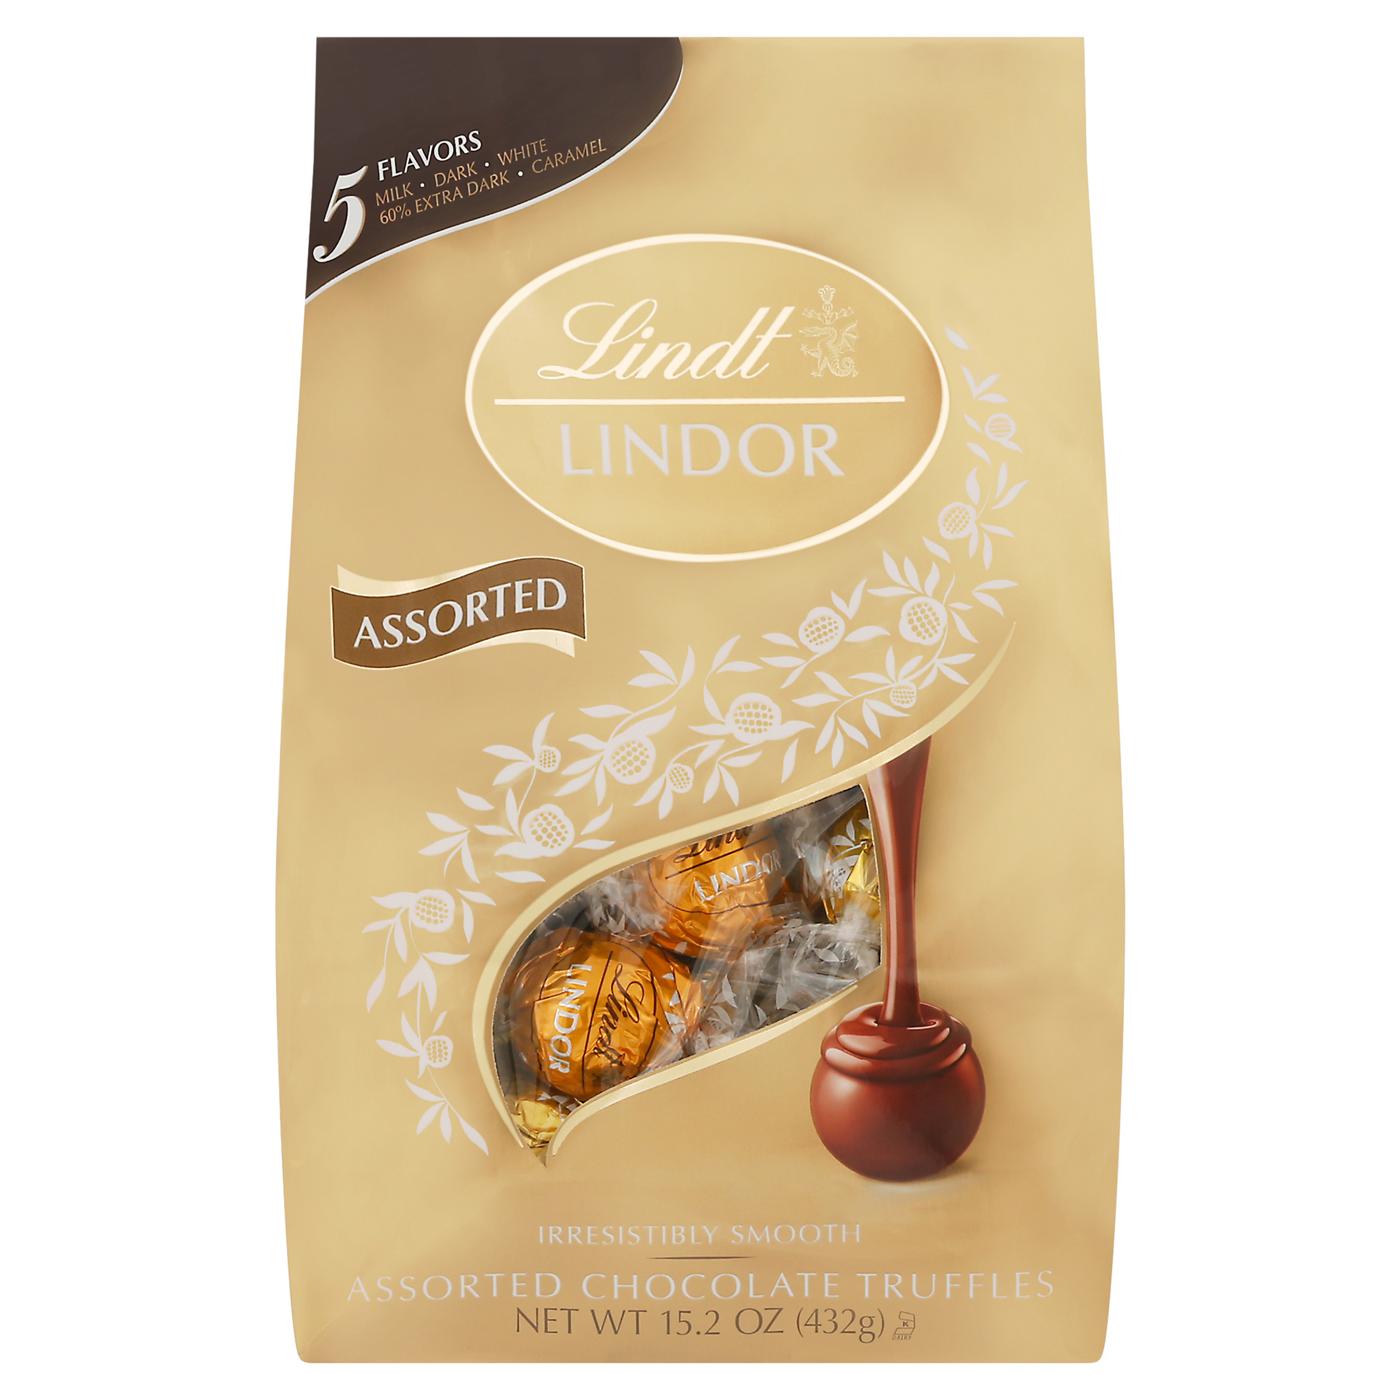 Lindt Lindor 5 Flavors Chocolate Truffles; image 1 of 2